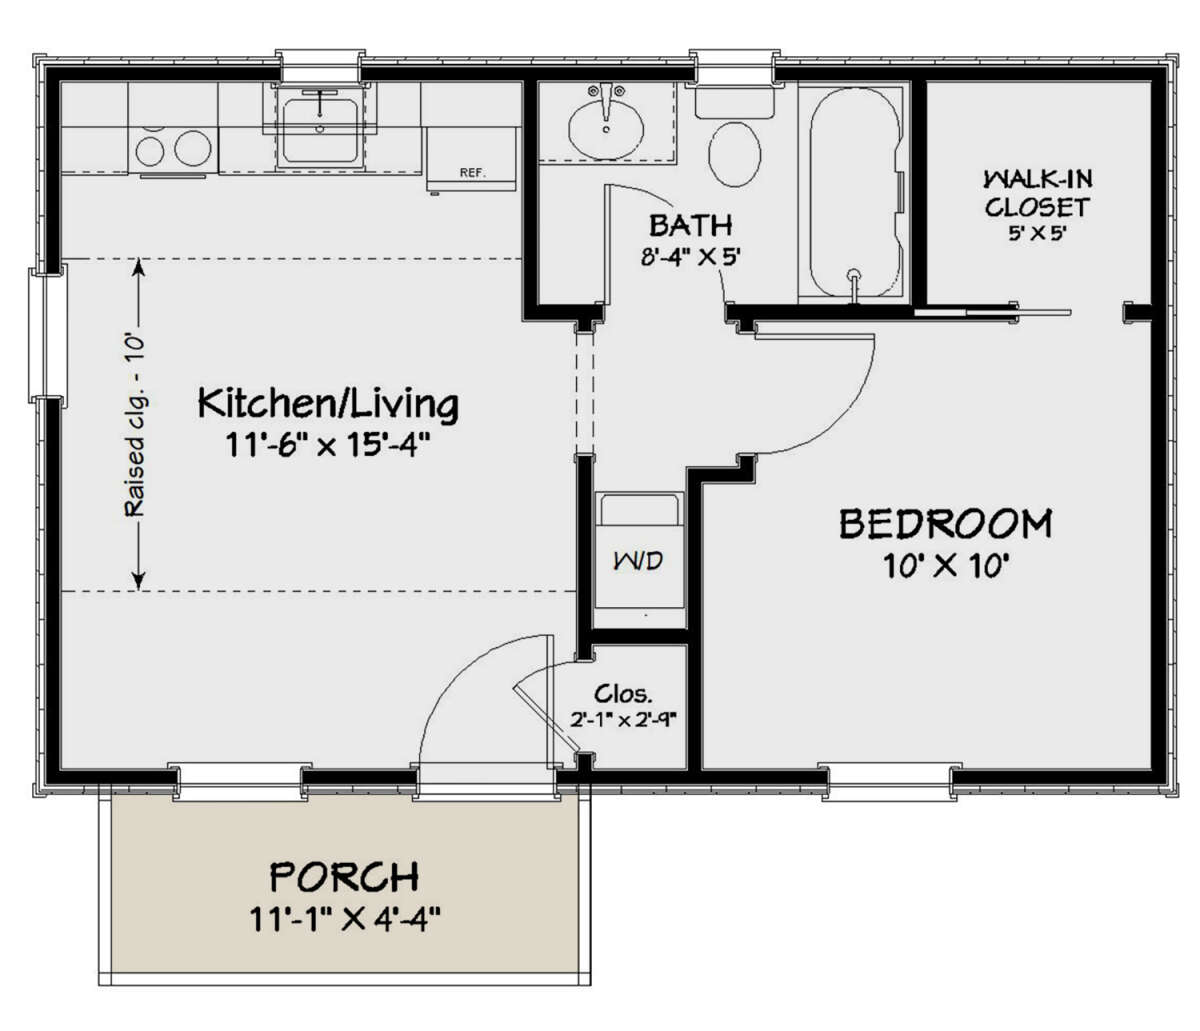 Why is Floor Plan Drawings Important in Residential Construction?